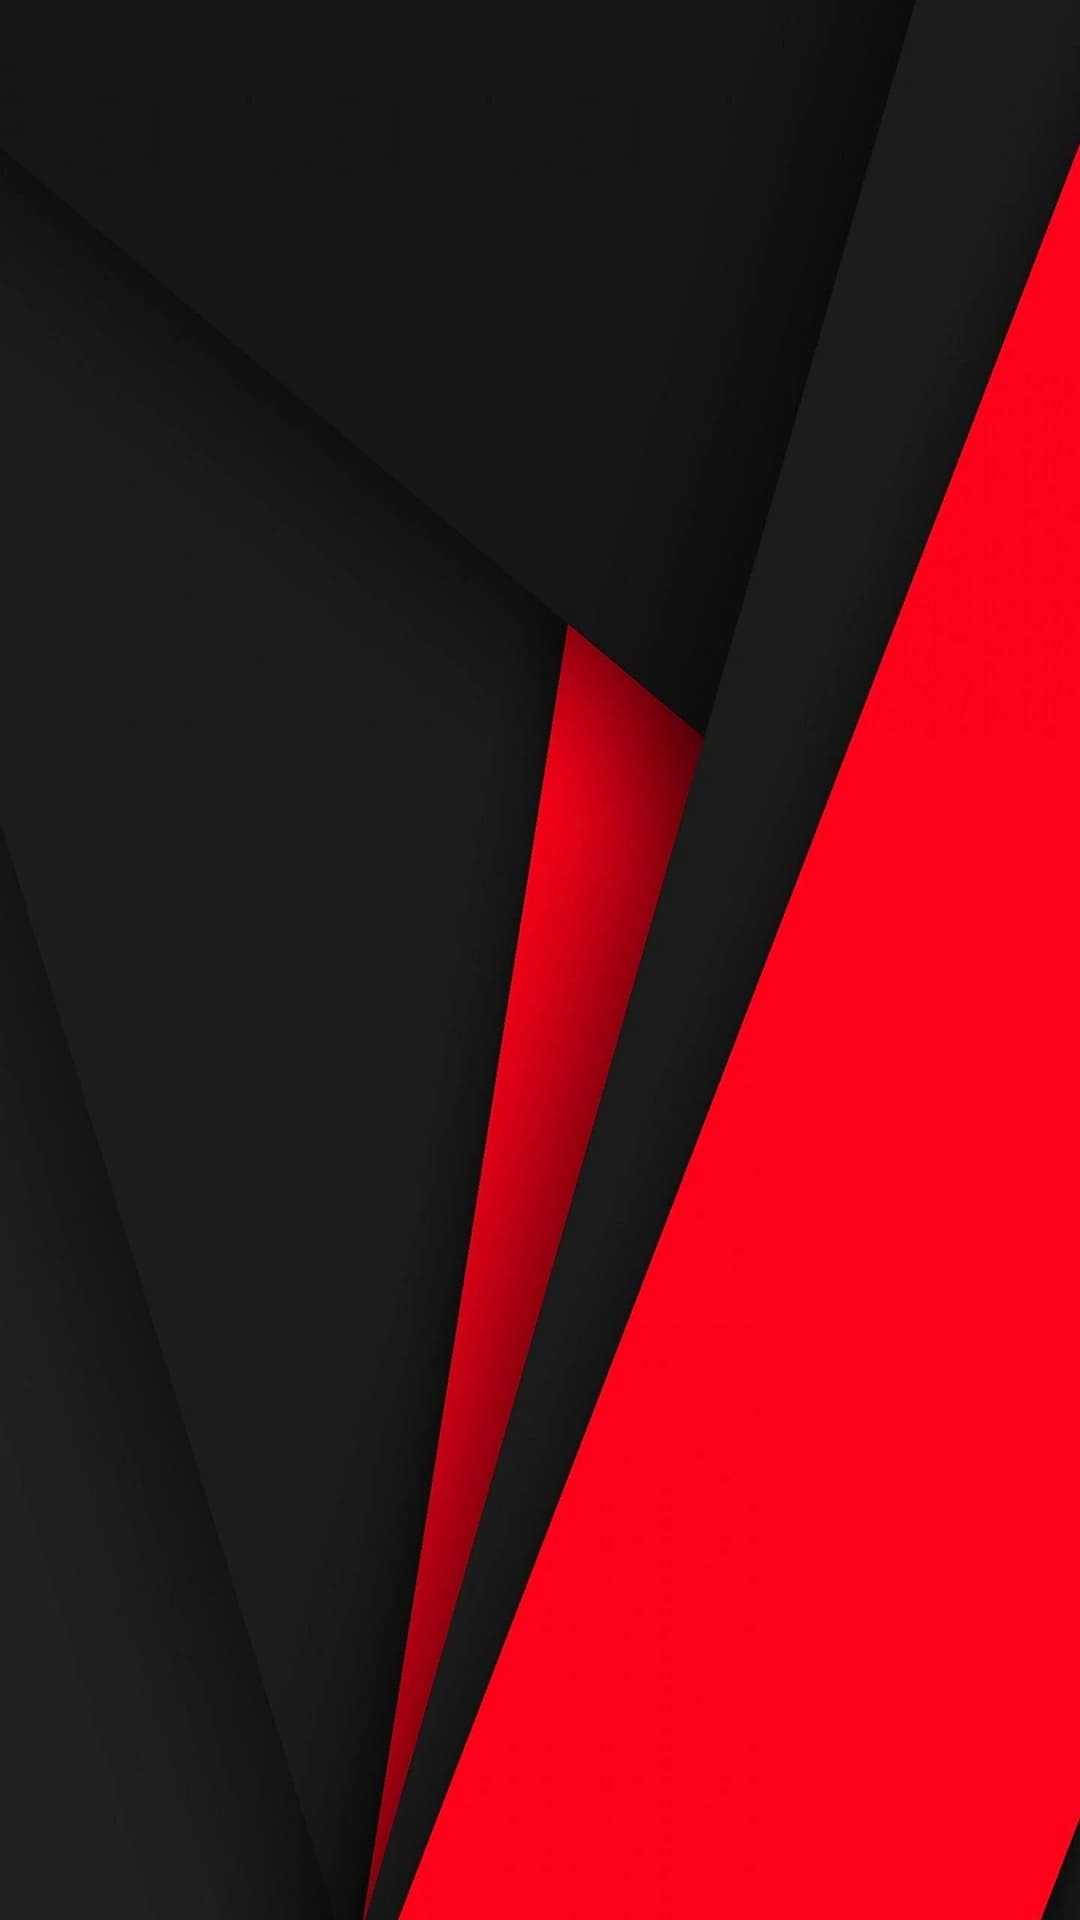 Black And Red Wallpaper - iXpap